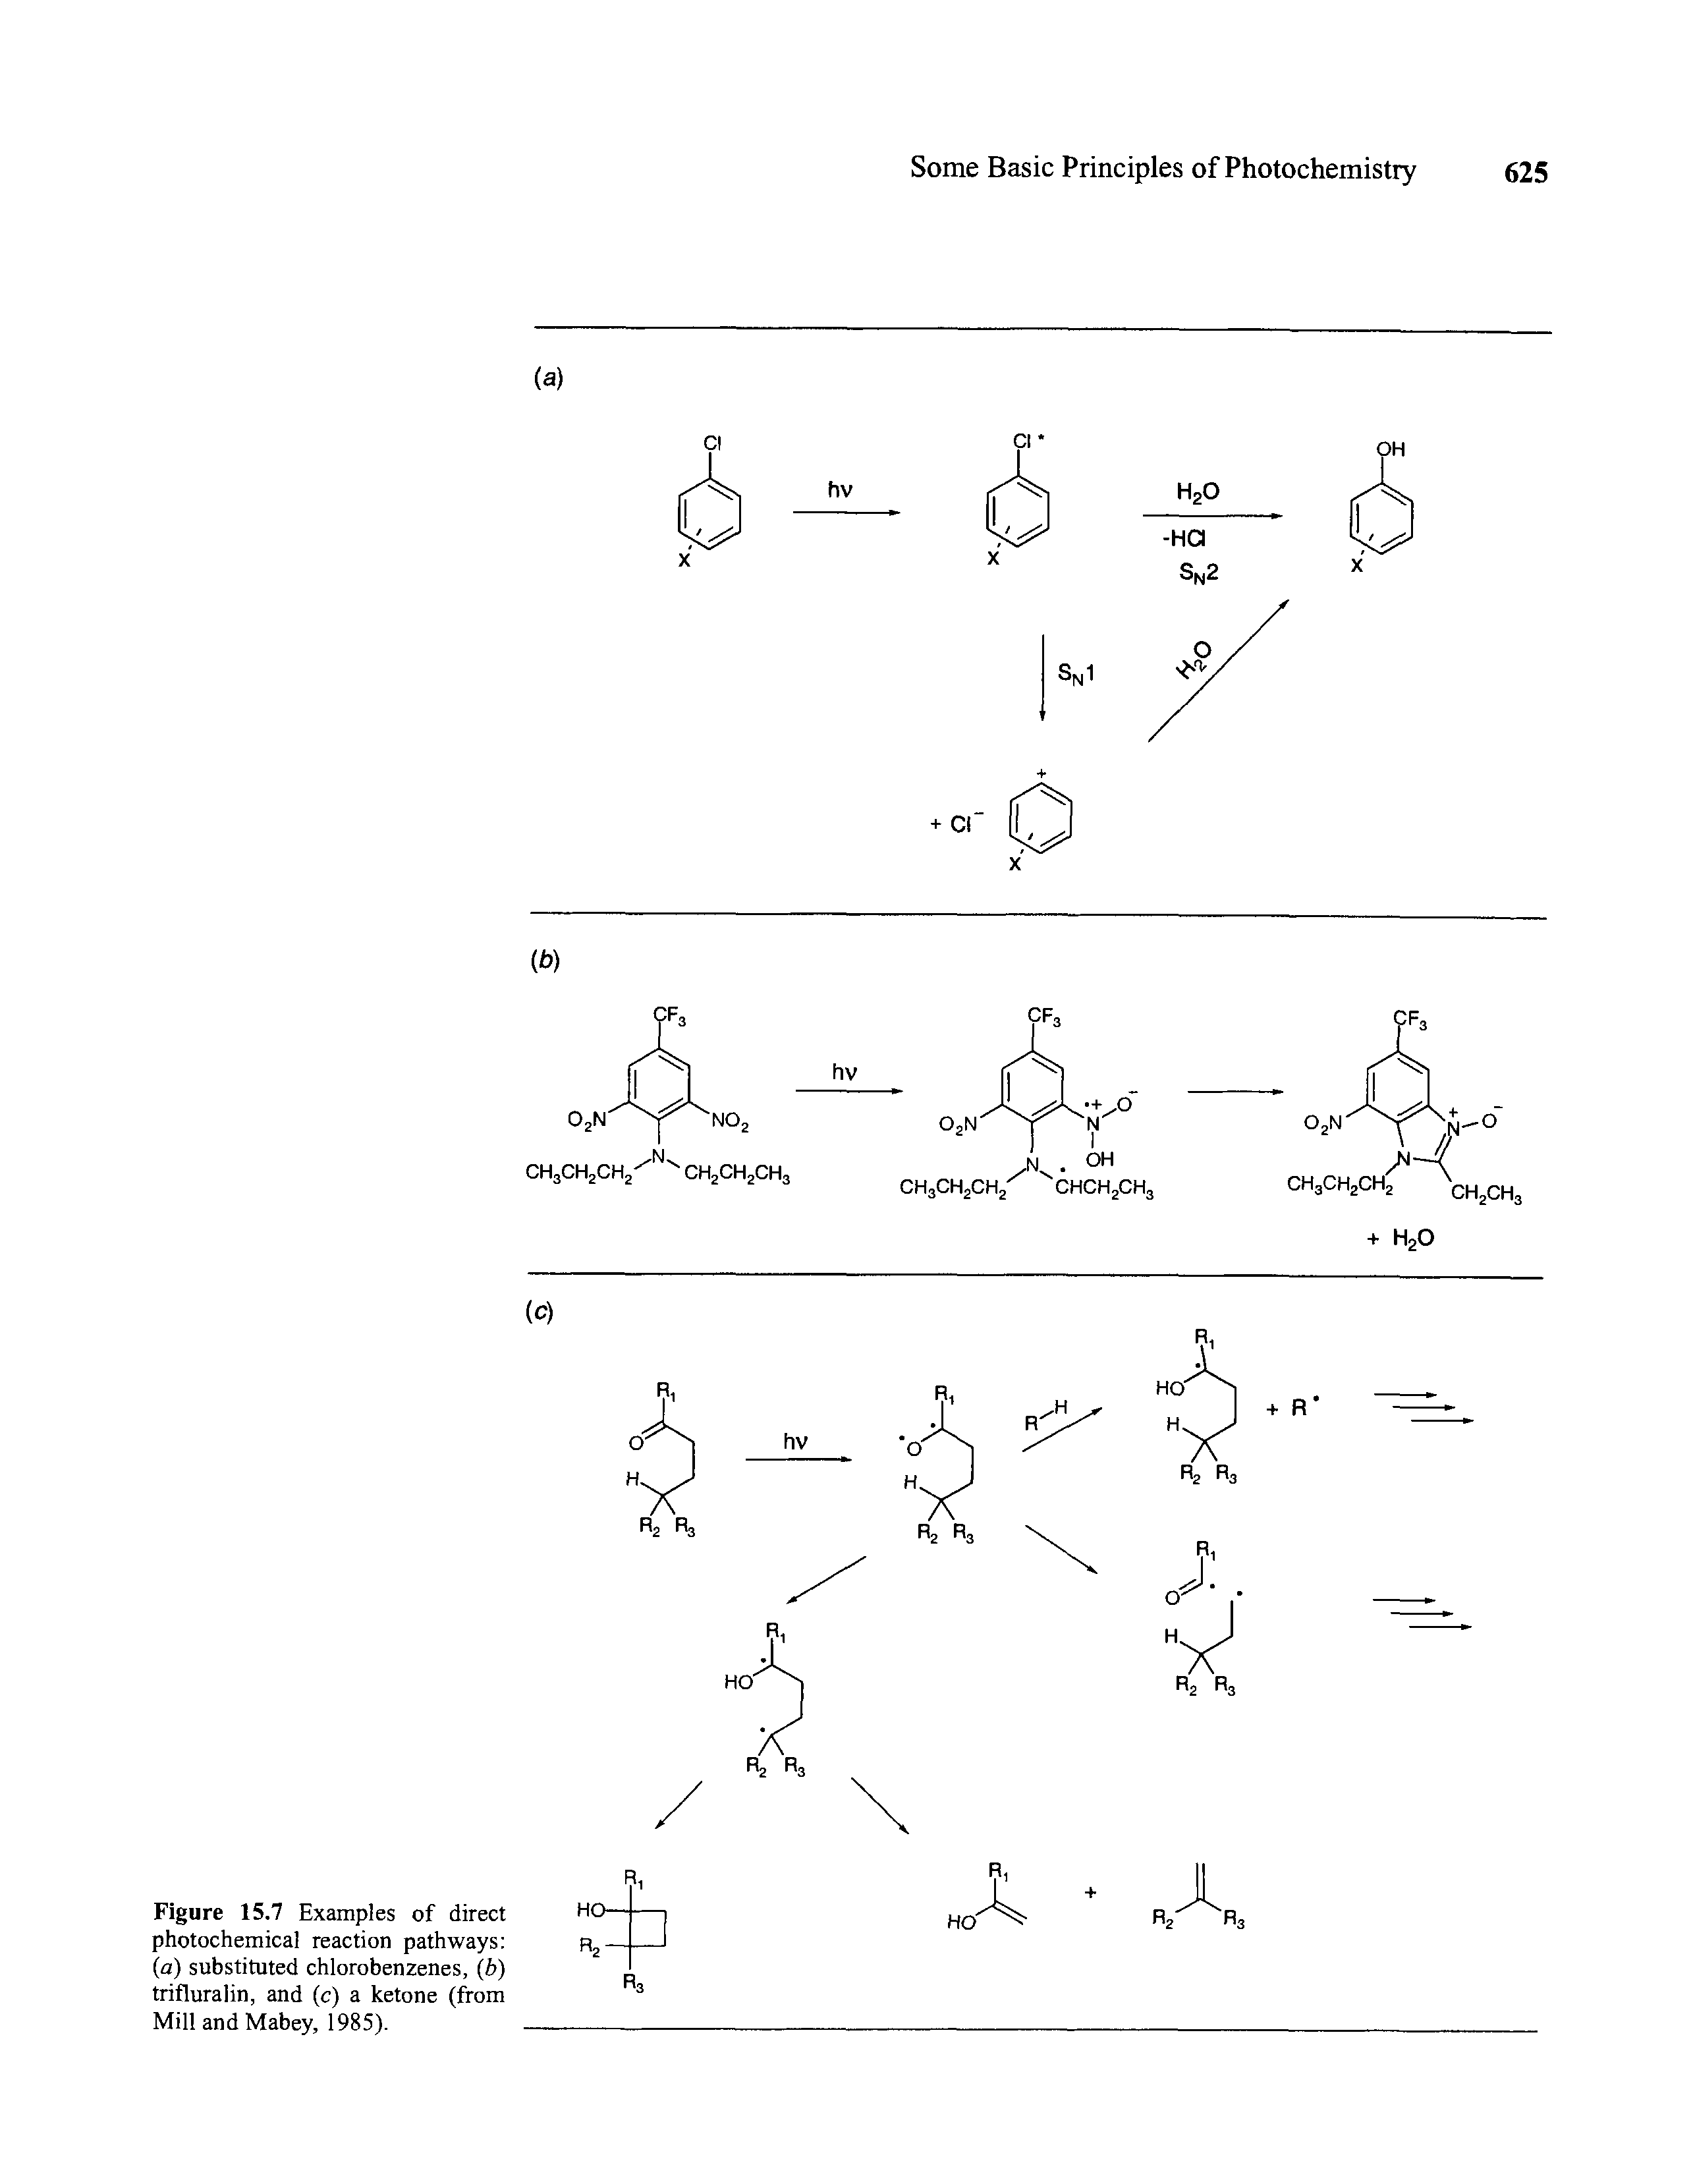 Figure 15.7 Examples of direct photochemical reaction pathways (a) substituted chlorobenzenes, (b) trifluralin, and (c) a ketone (from Mill and Mabey, 1985).